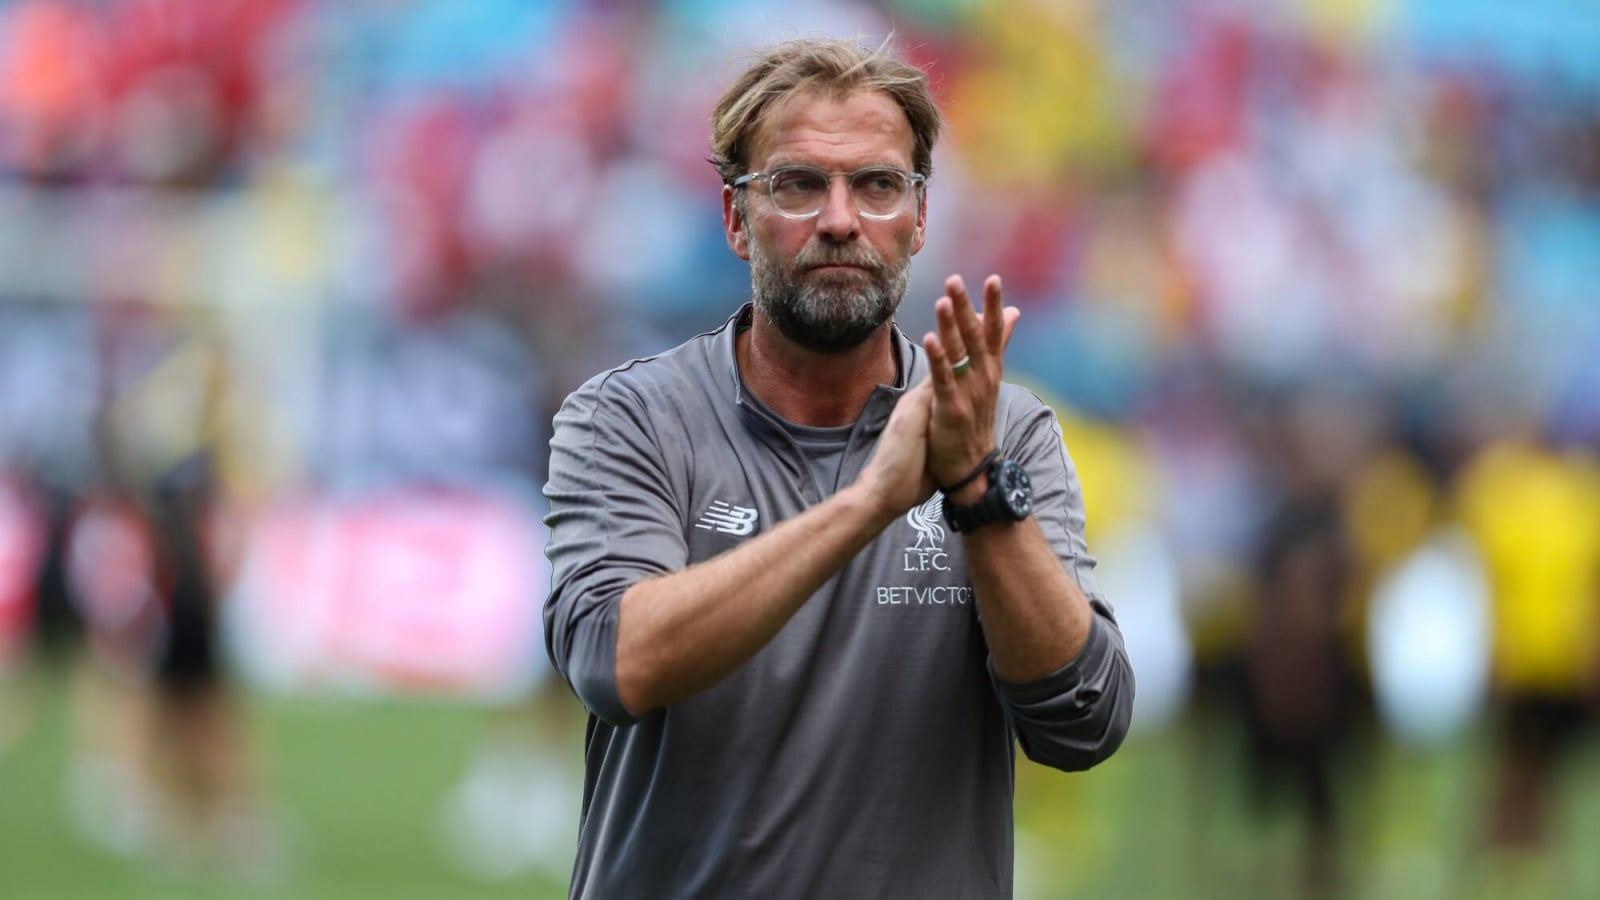 Watch: Jurgen Klopp joins Instagram just in time to say poignant farewell message to LFC fans